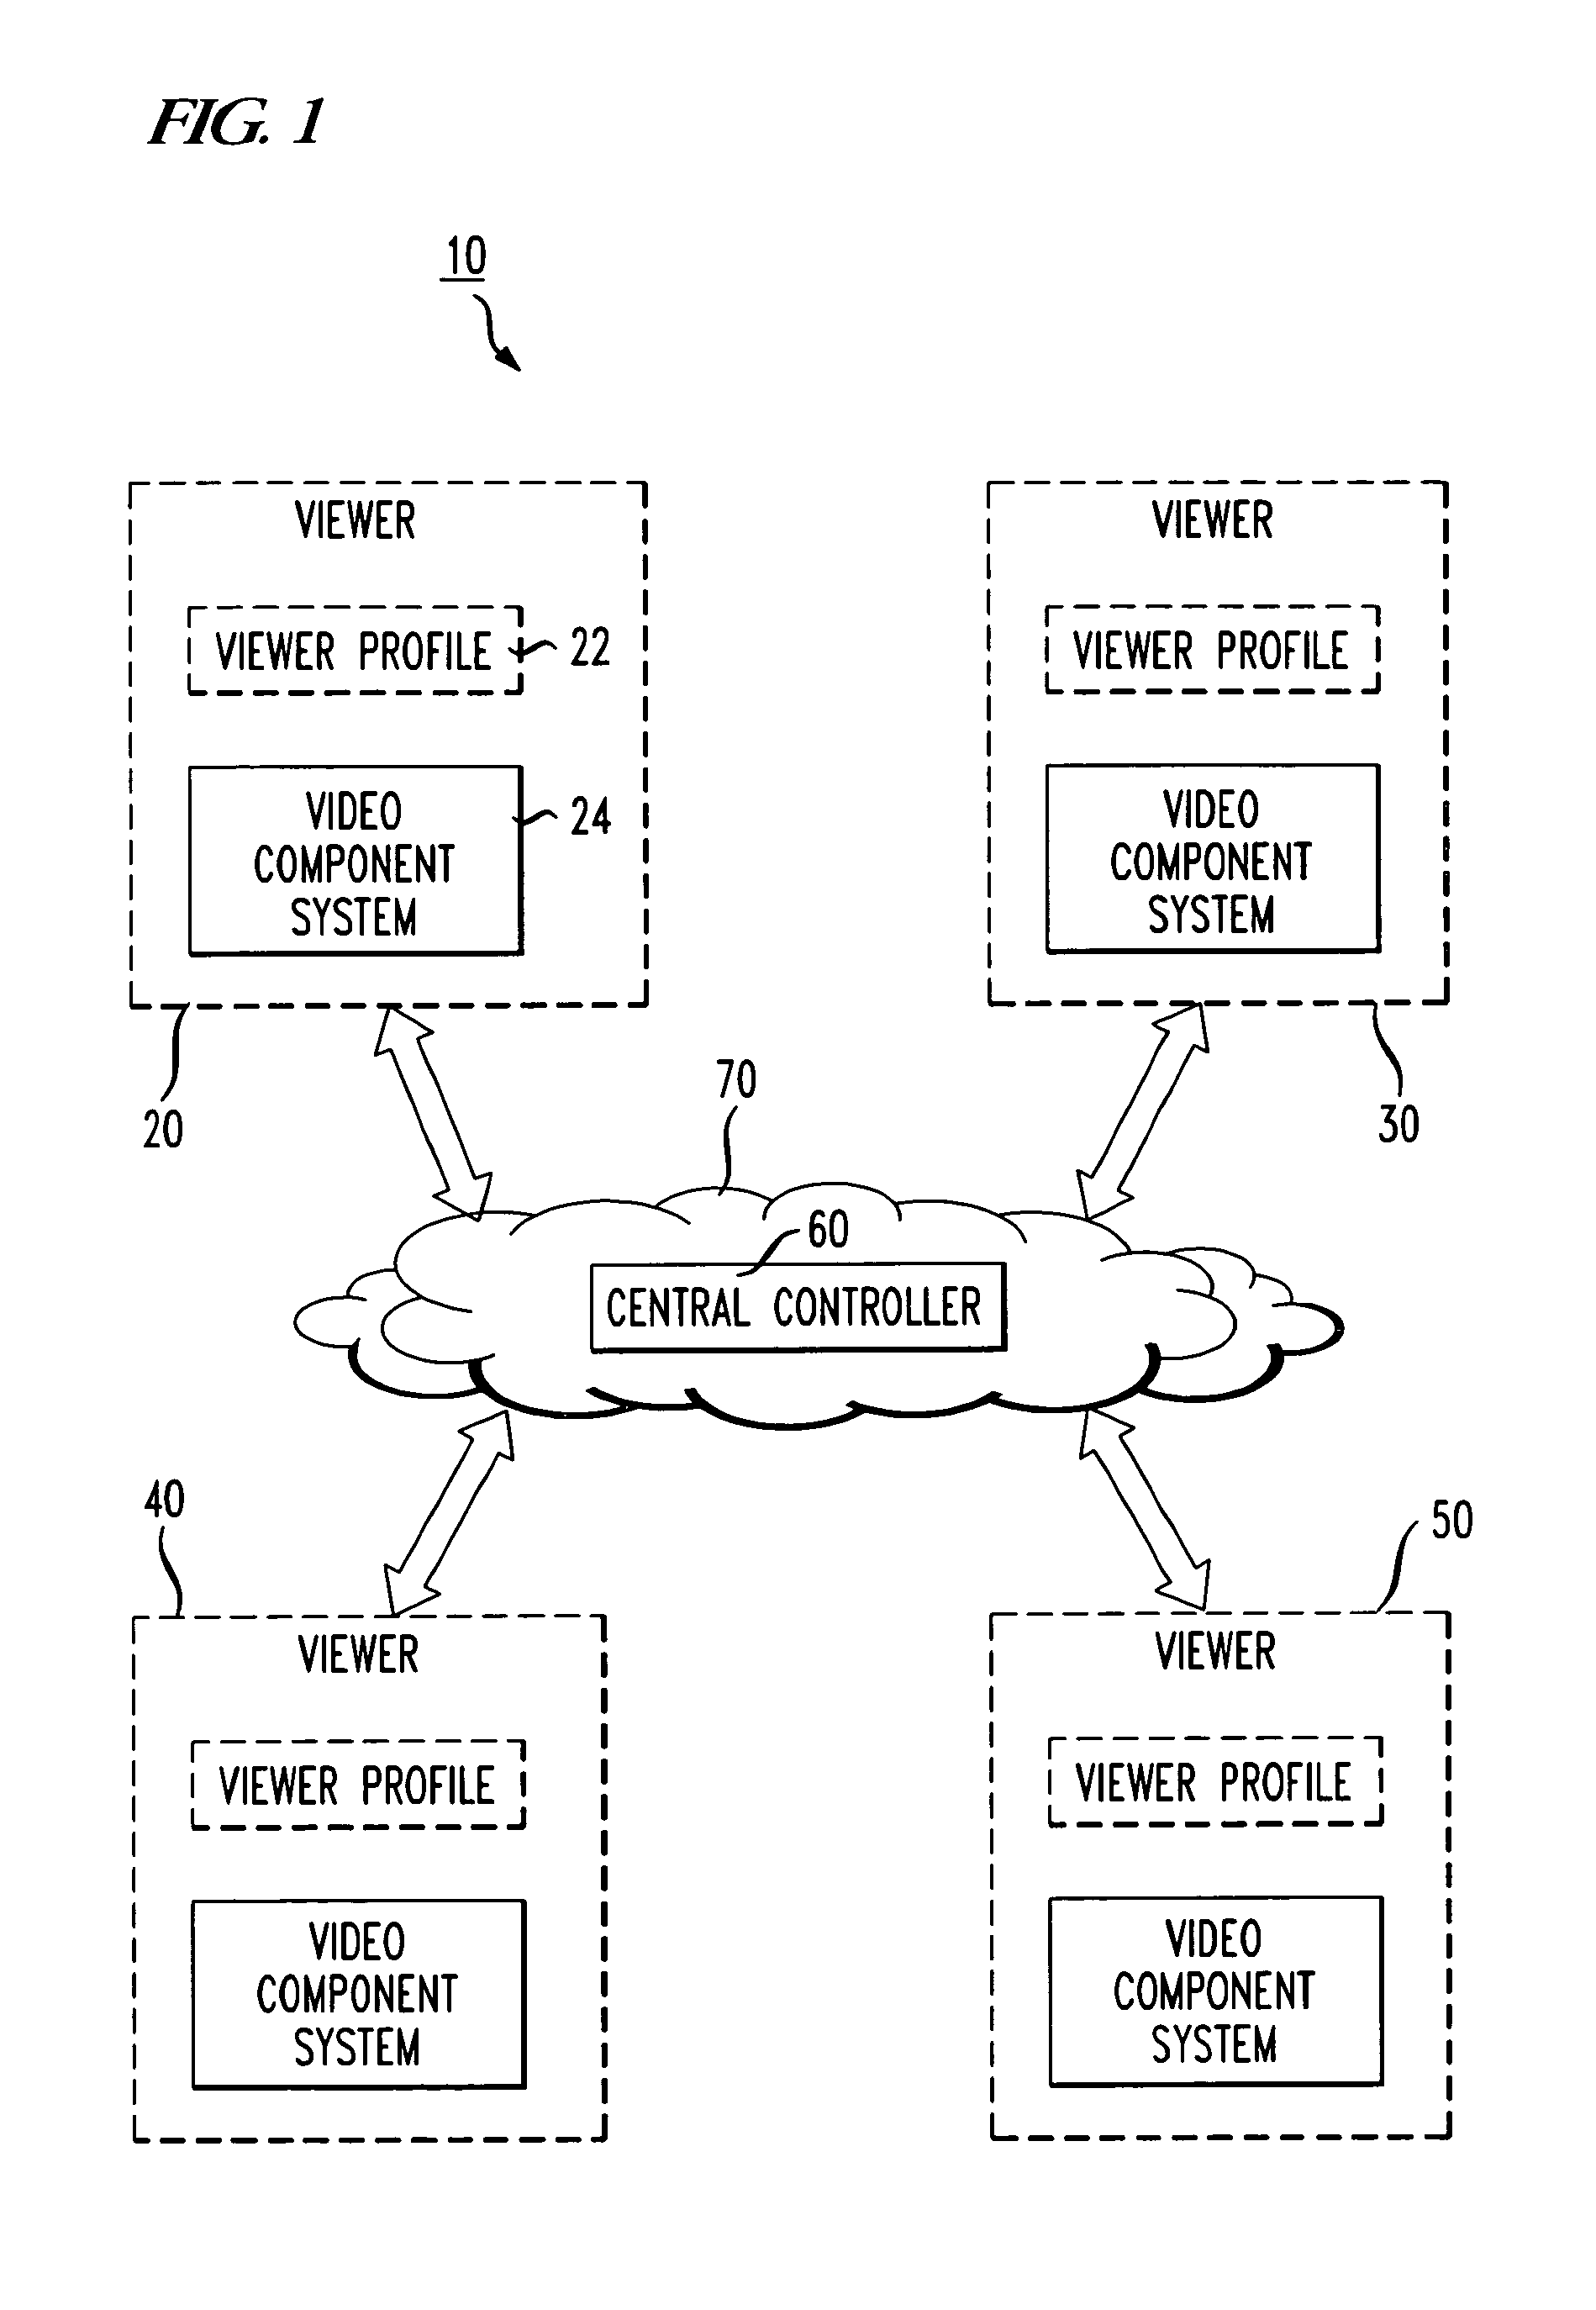 System and method for providing program recommendations through multimedia searching based on established viewer preferences